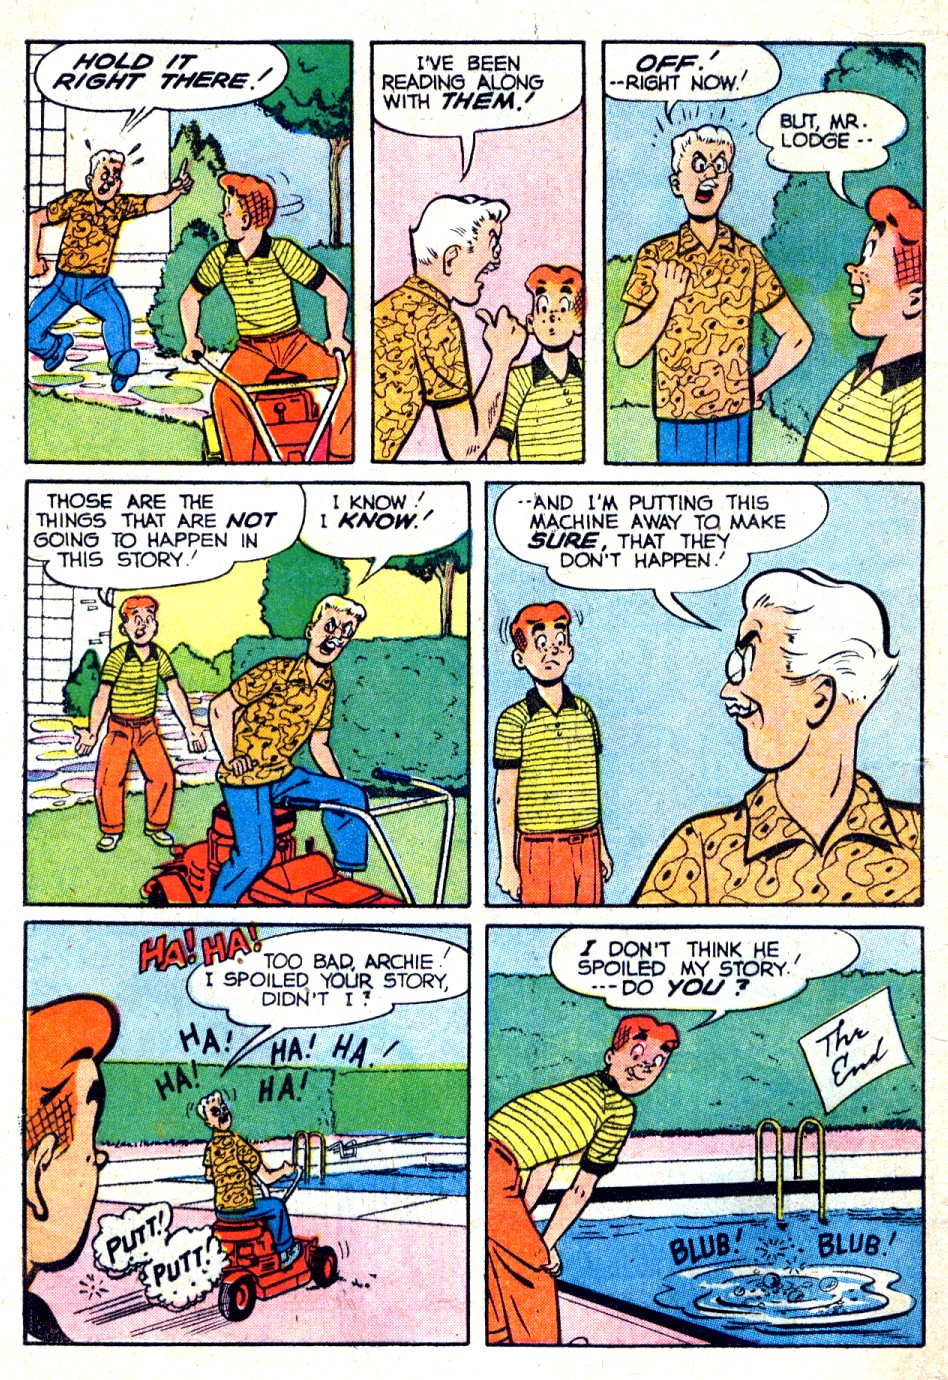 Archie (1960) 114 Page 8